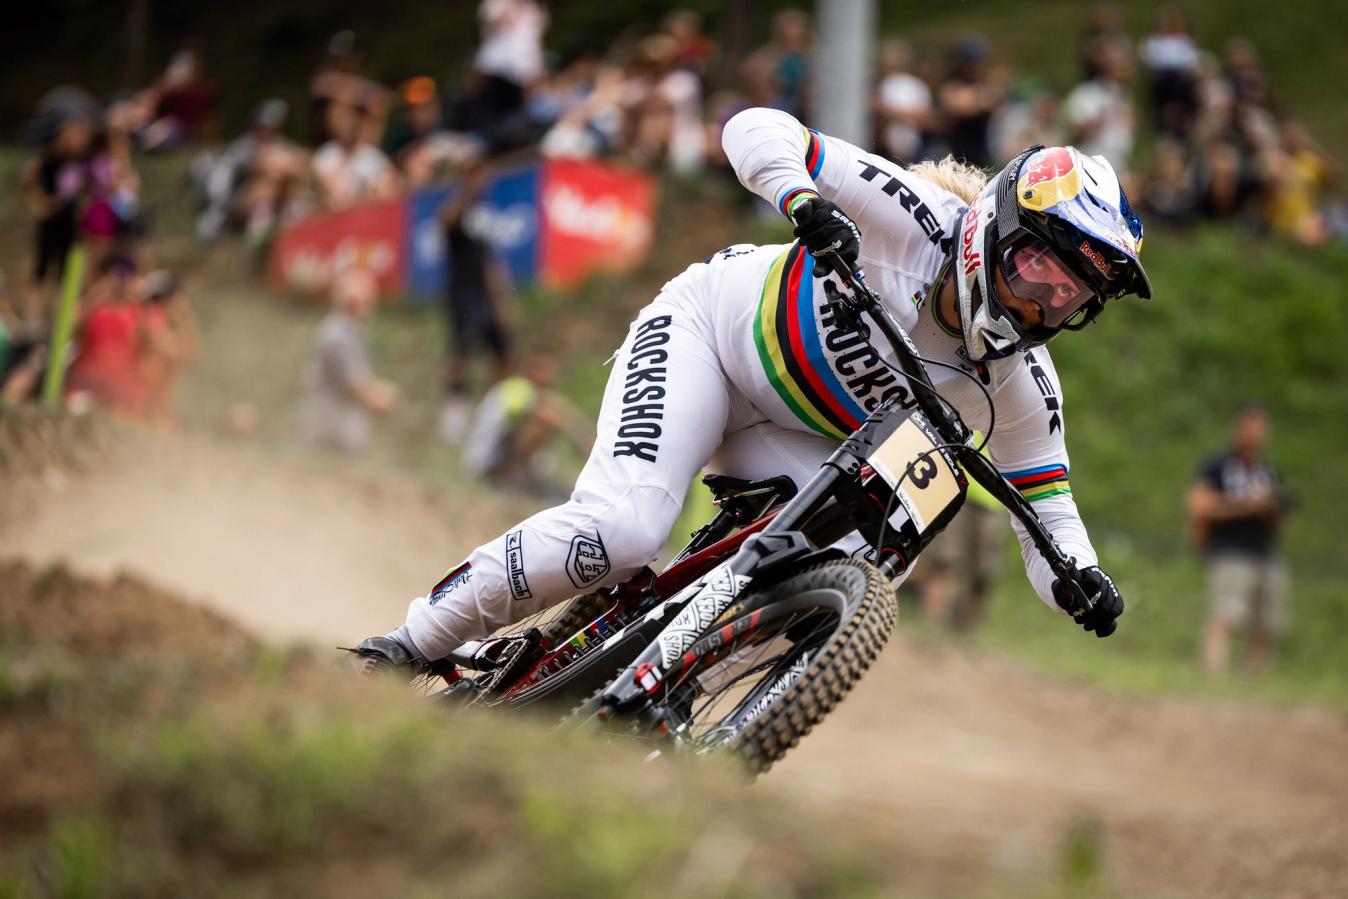 Vali Höll will try to defend her downhill rainbow jersey in Scotland